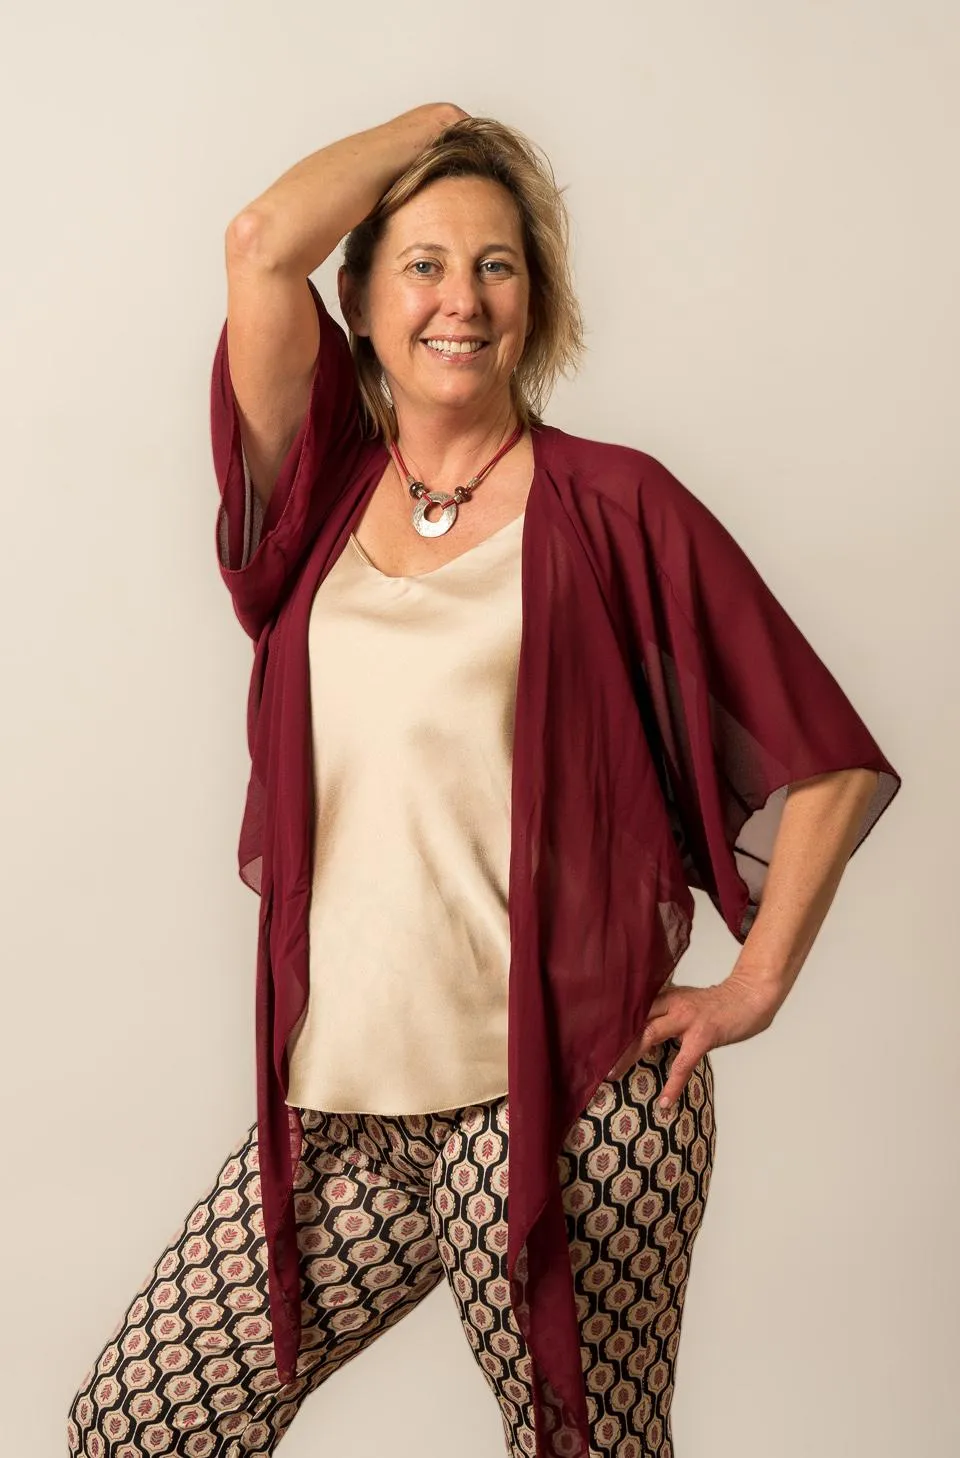 Jenn Baljko facilitating an empowering emotional embodiment workshop, helping women in their 50s, 60s, and 70s connect with their emotions through movement and self-expression.